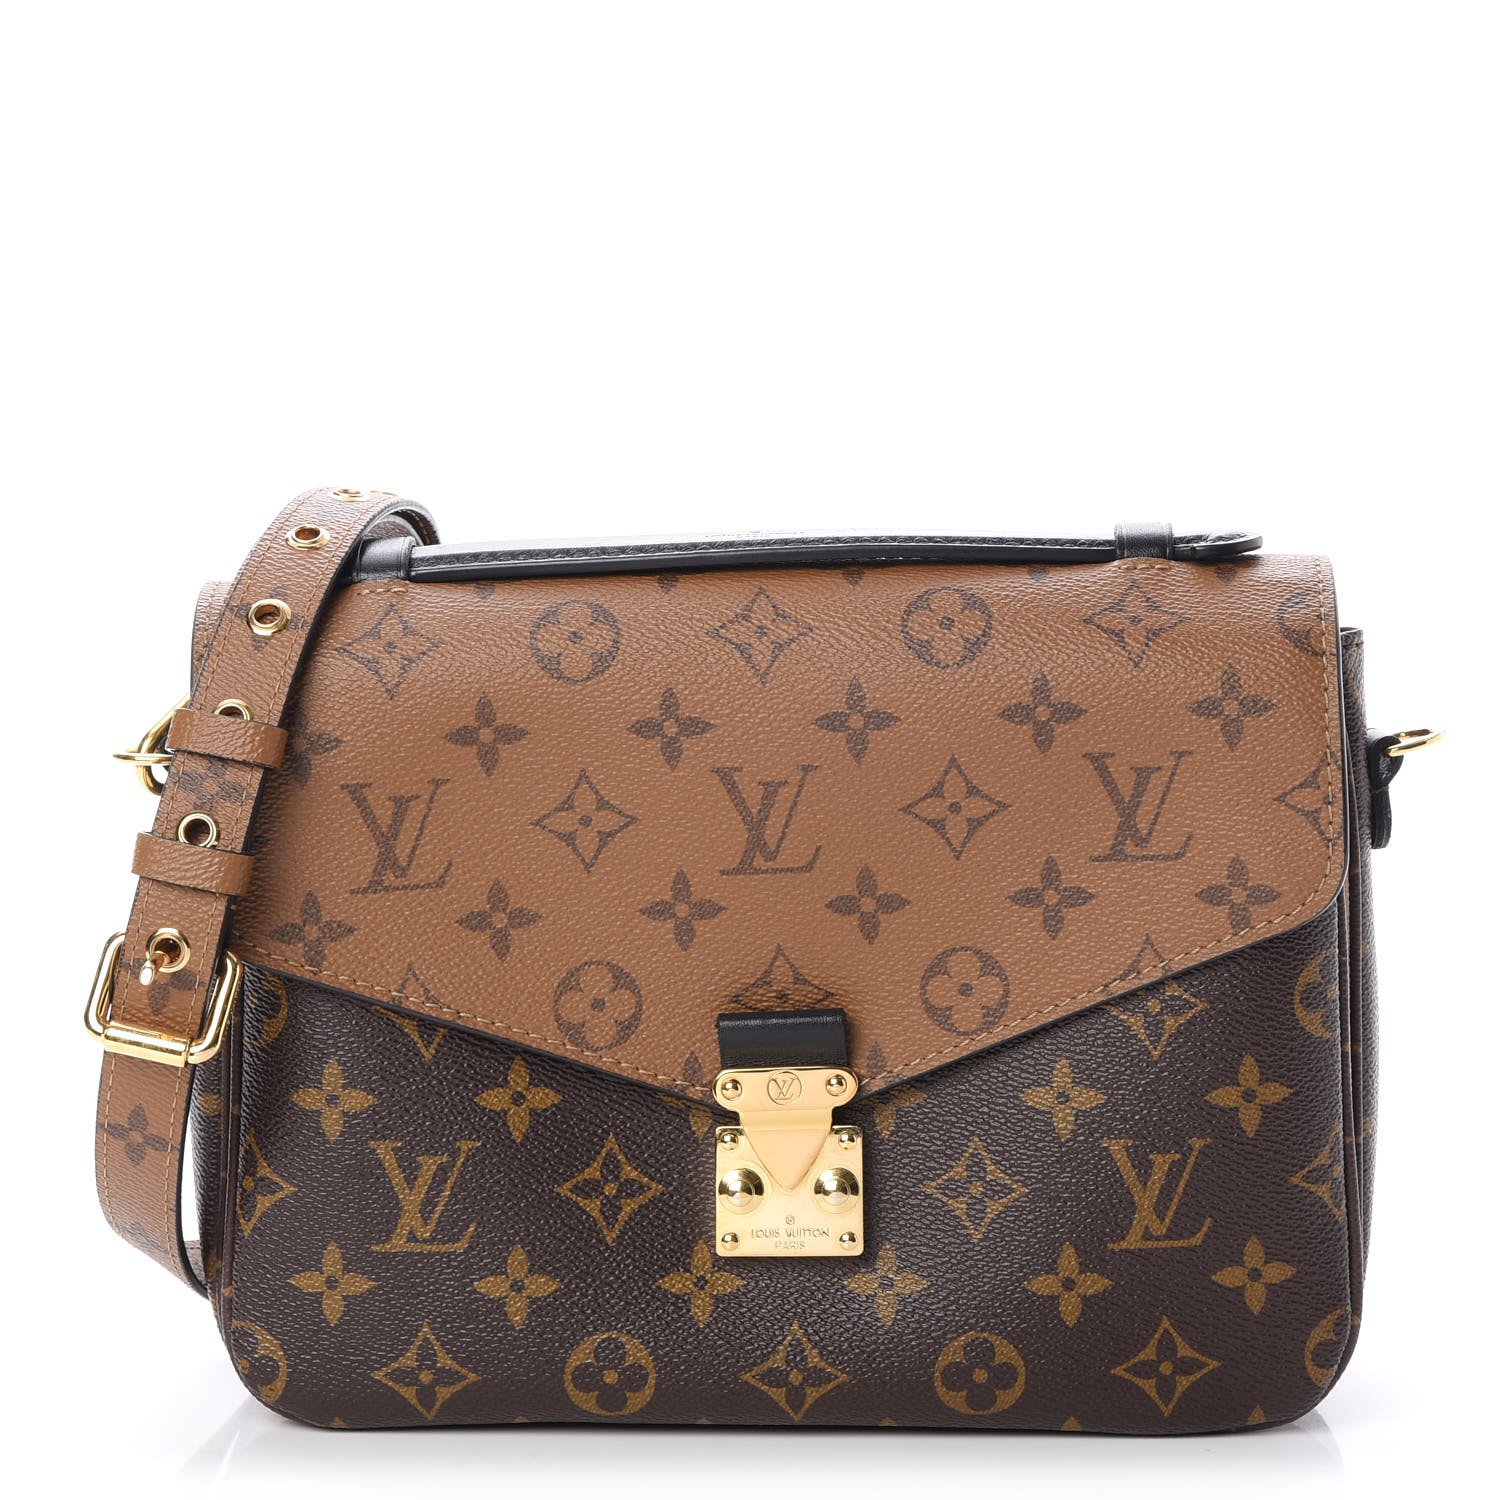 Louis Vuitton Petite Malle Souple Bag Reference Guide - Spotted Fashion